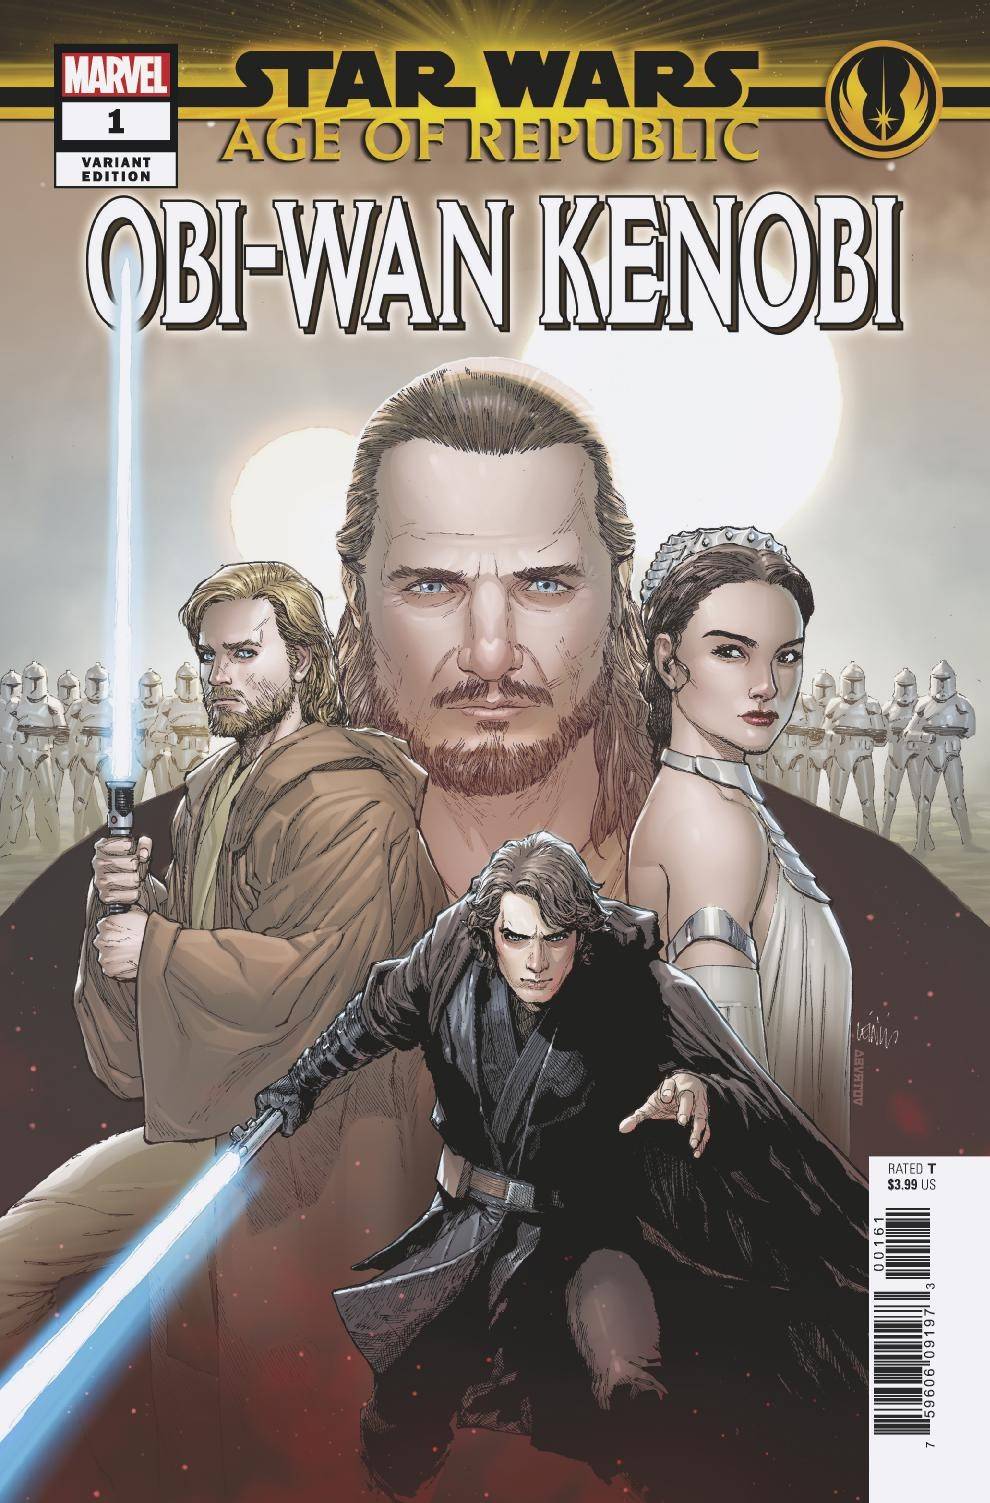 STAR WARS AGE OF REPUBLIC ONE-SHOTS 2019